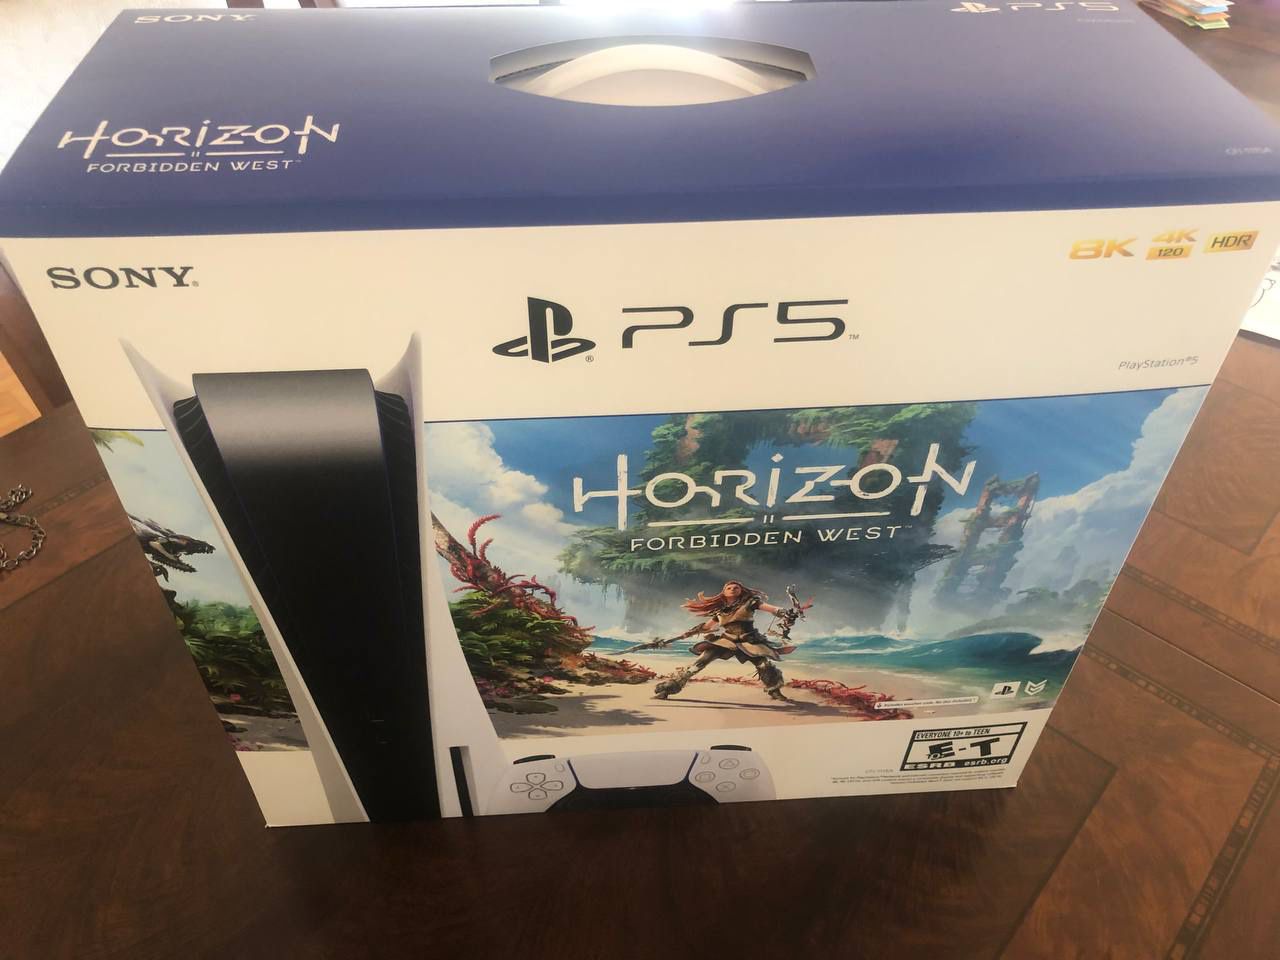 Ps5 Disc Edition Horizon. Brand New. Cash and pick up in Fort Lee New Jersey 